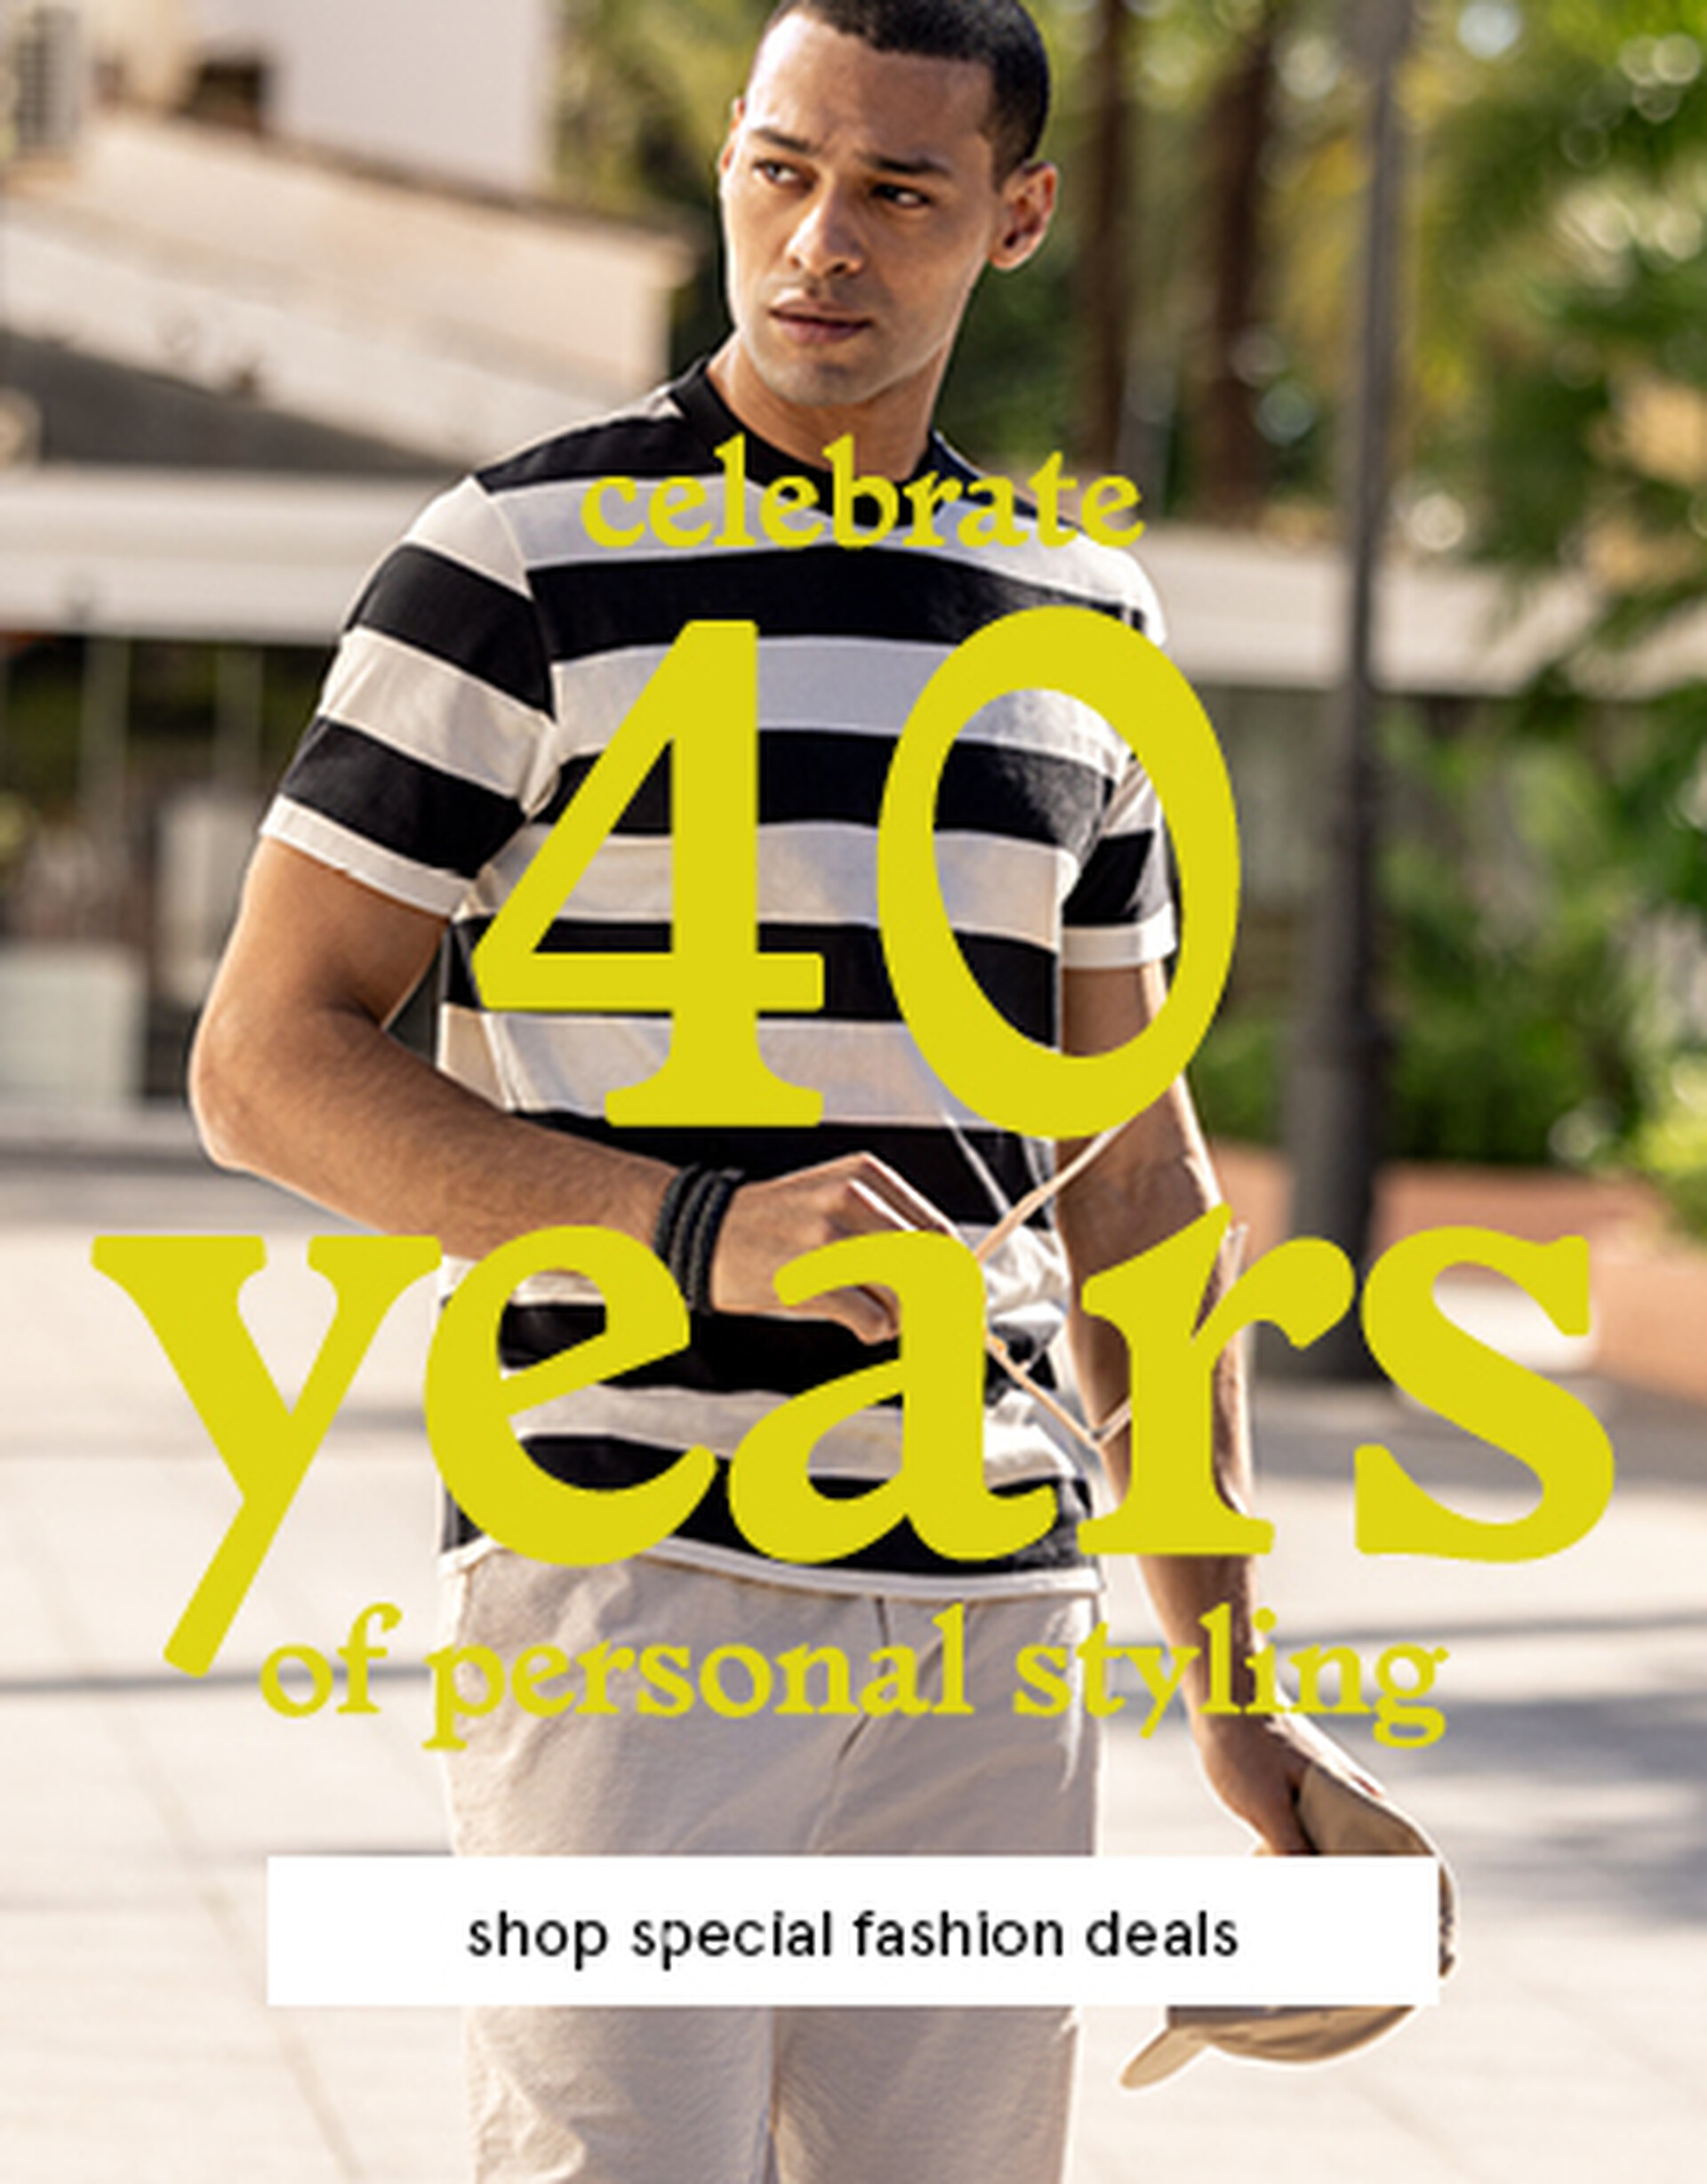 40 years of personal styling